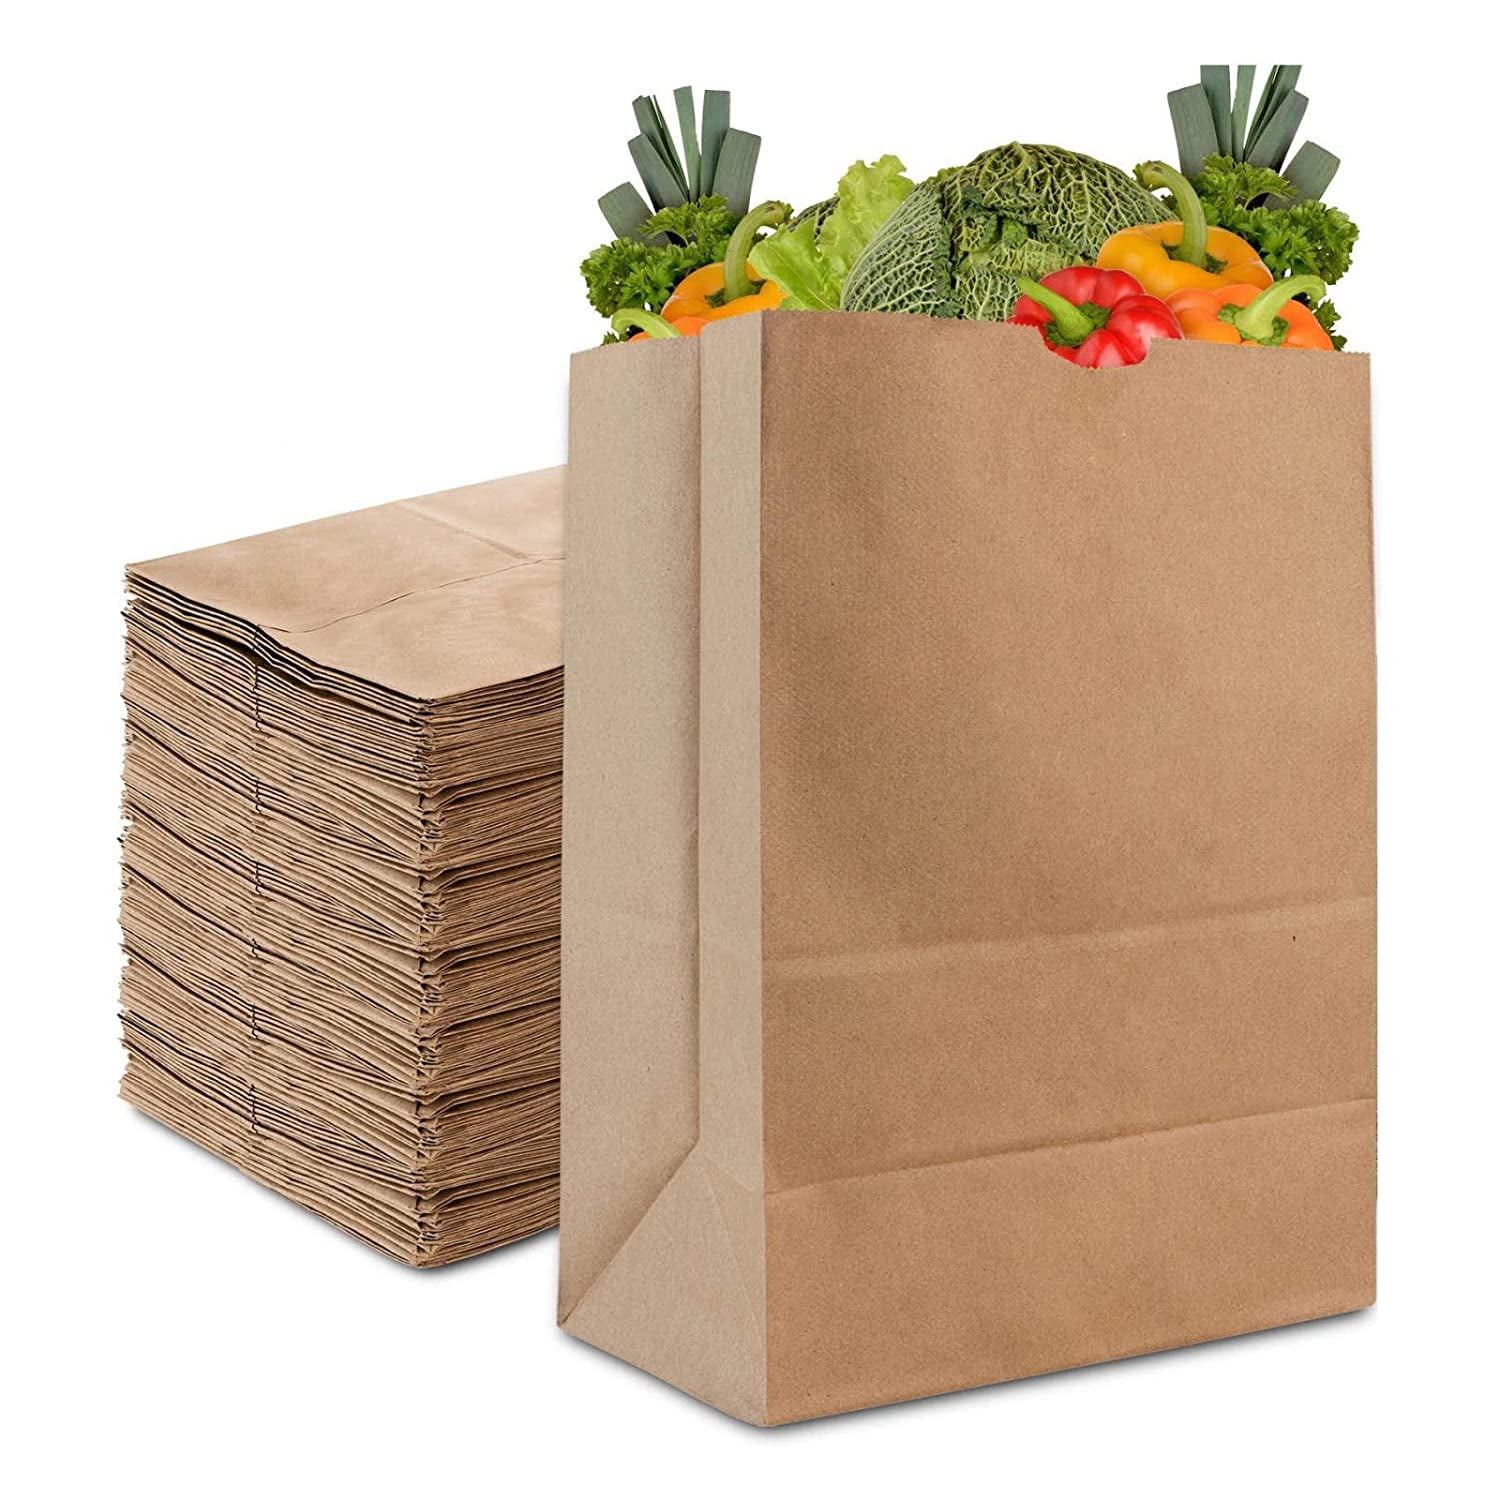 Large Kraft Brown Paper Grocery Bags (50 Count) 57lb by Stock Your